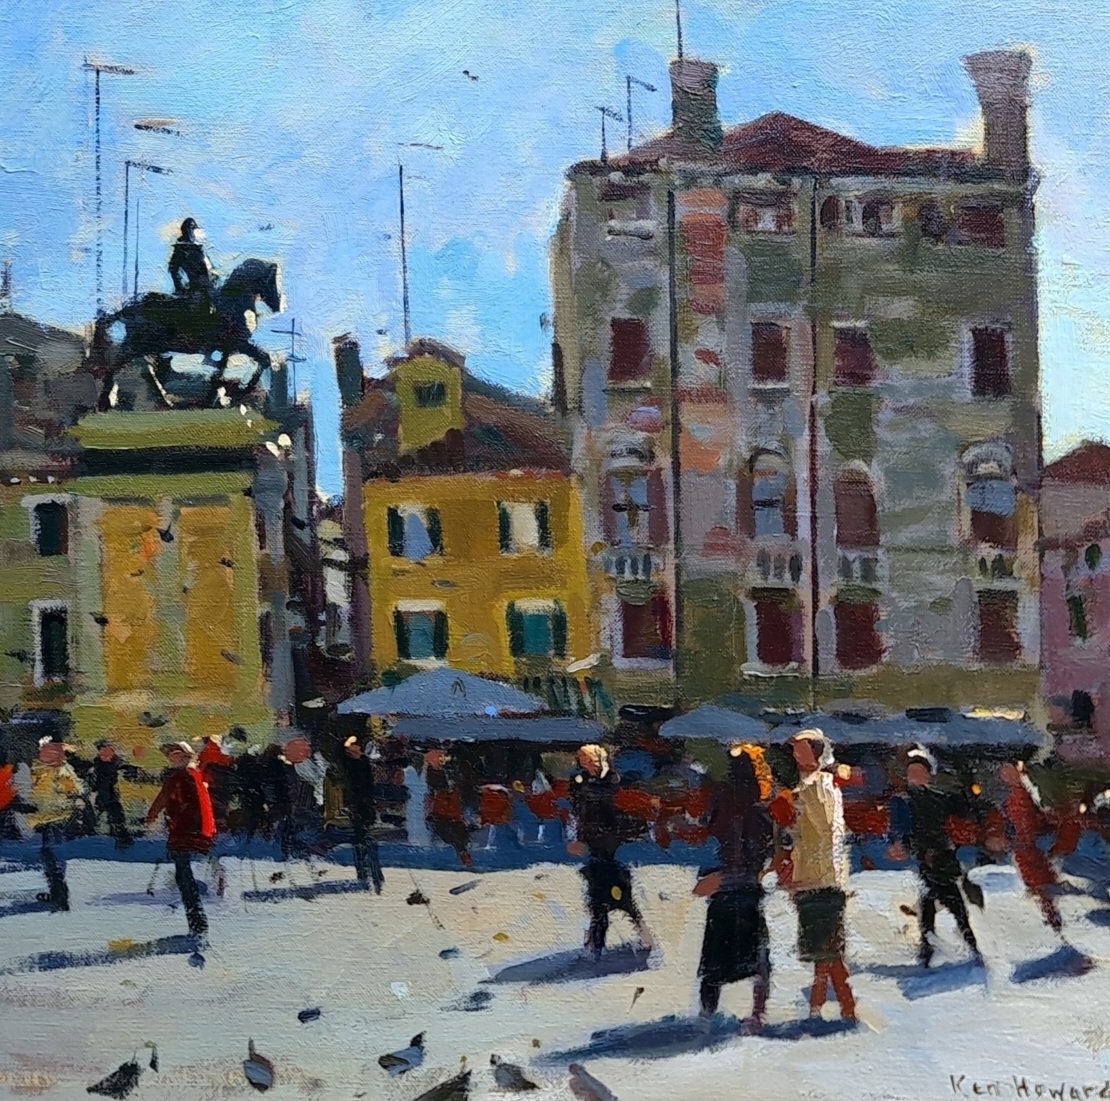 Detail from 'Colleoni San Giovanne Paulo' by Ken Howard RA (1932 - 2022) Oil on canvas, signed lower right. Canvas size: 20 x 24 inches #kenhoward #BartolomeoColleoni #andreaverrocchio #SanGiovanniePaolo #venice #equestrian #equestriansculpture